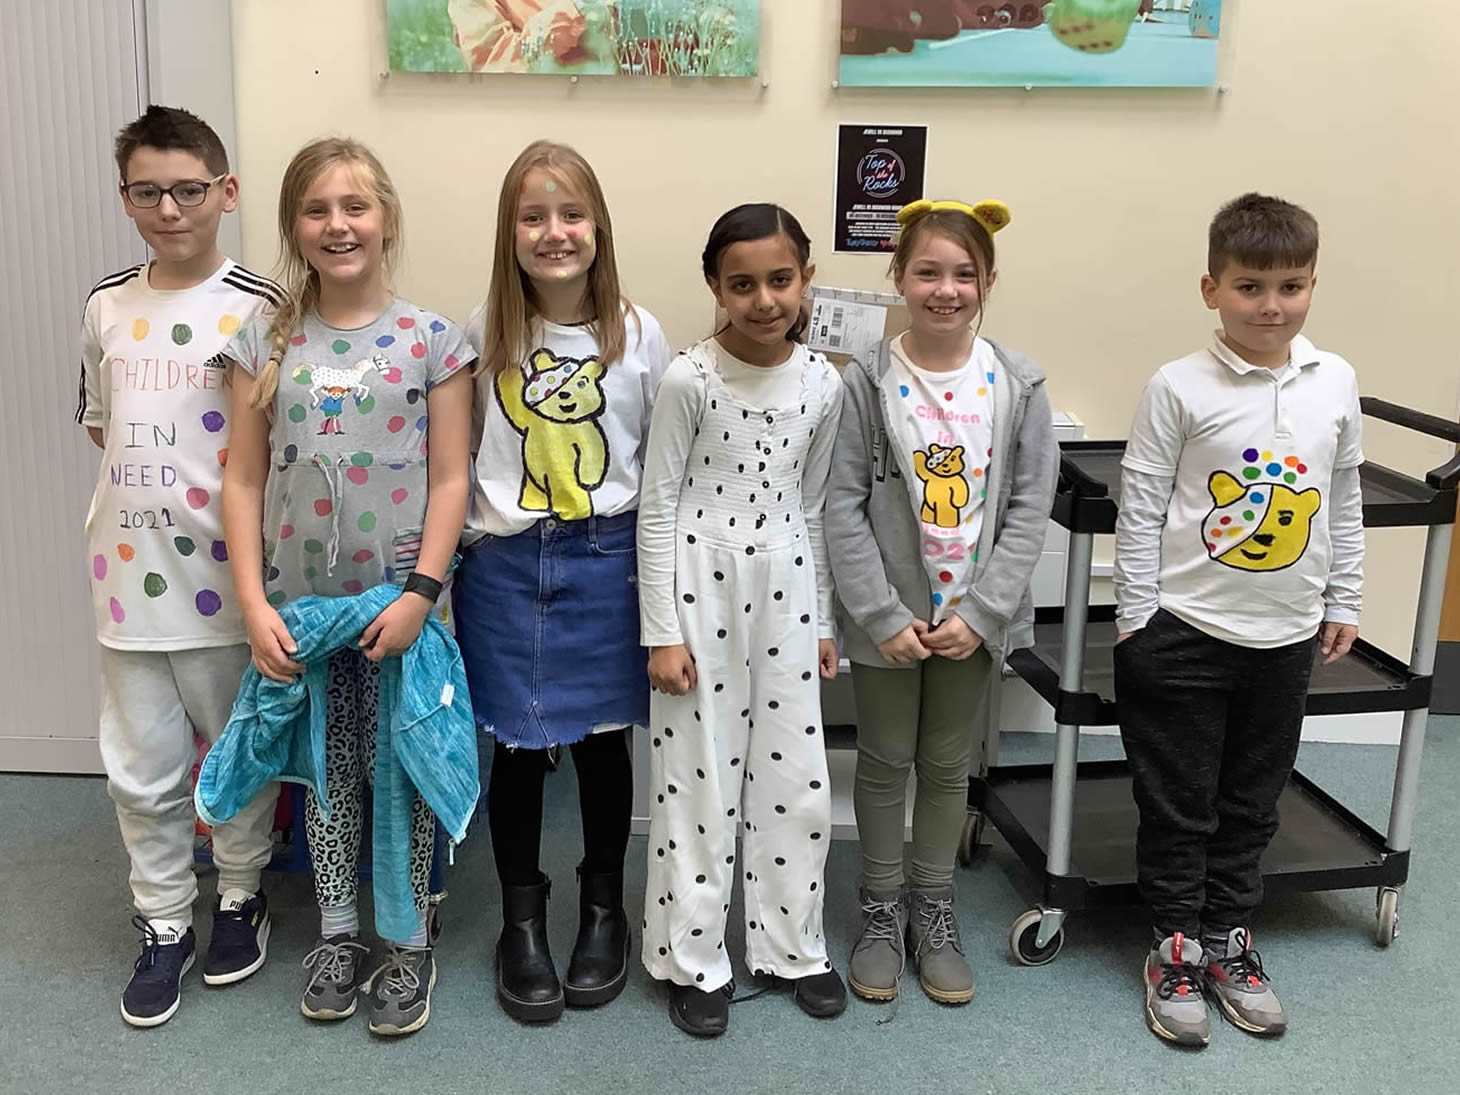 Spotty clothes for Children in Need